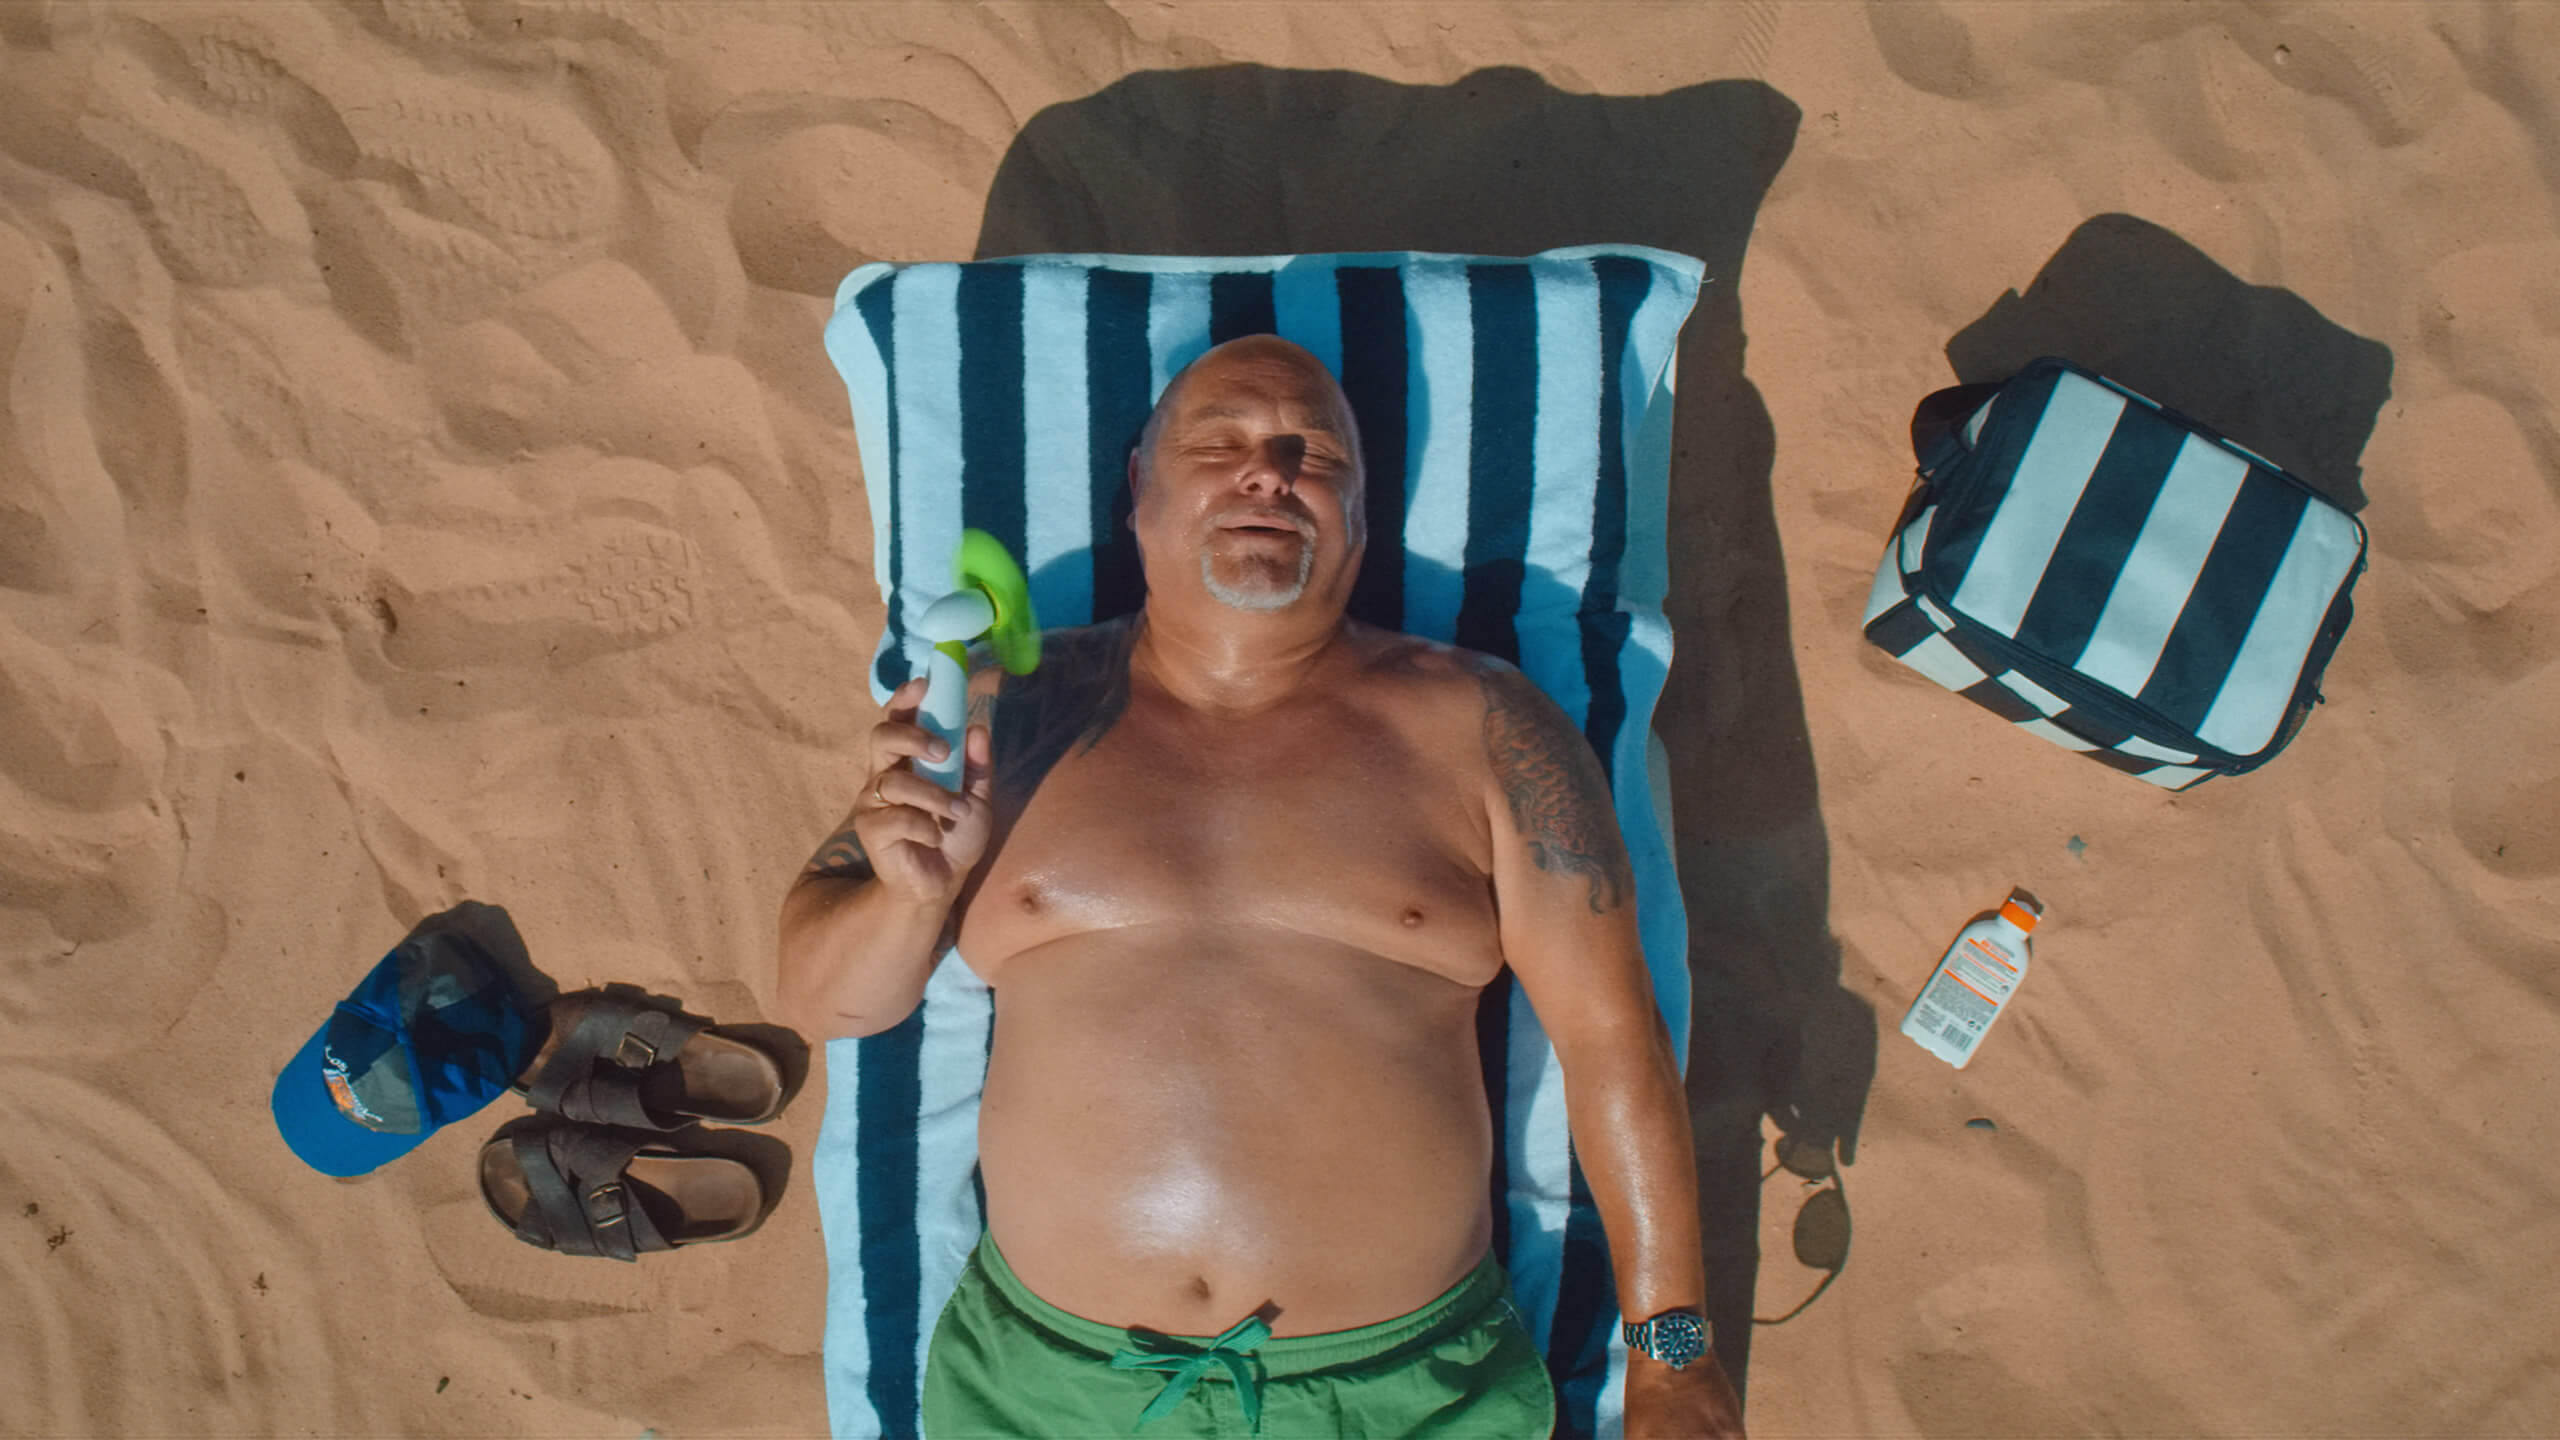 A still of a sunbathing man from our Hoo video shot on Great Yarmouth beach, from the Rise Media case studies archive